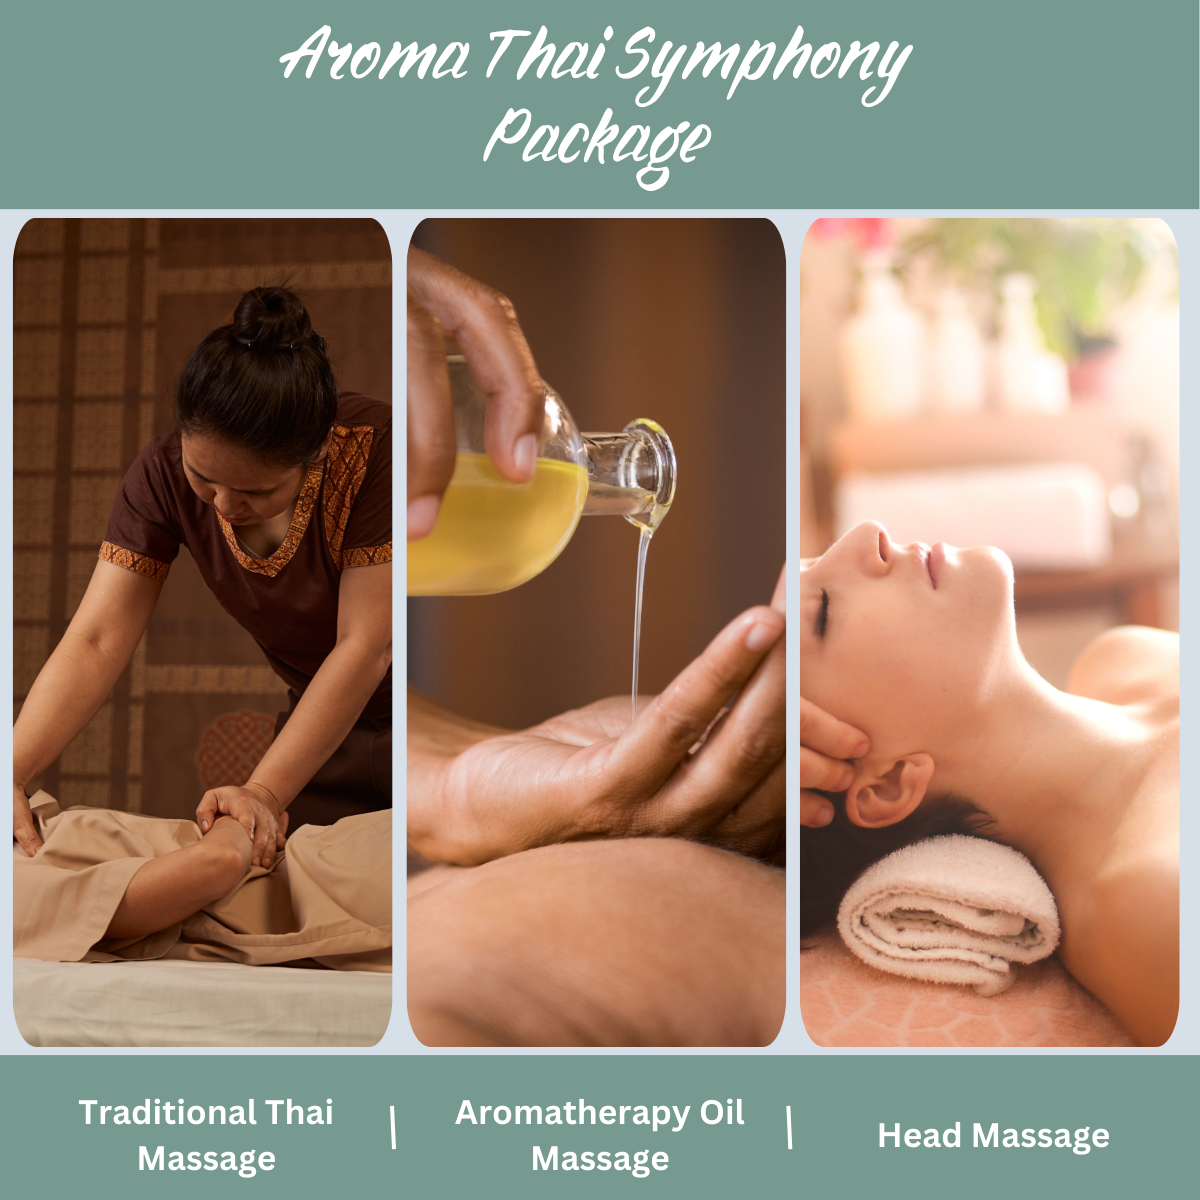 Aroma Thai Symphony Package